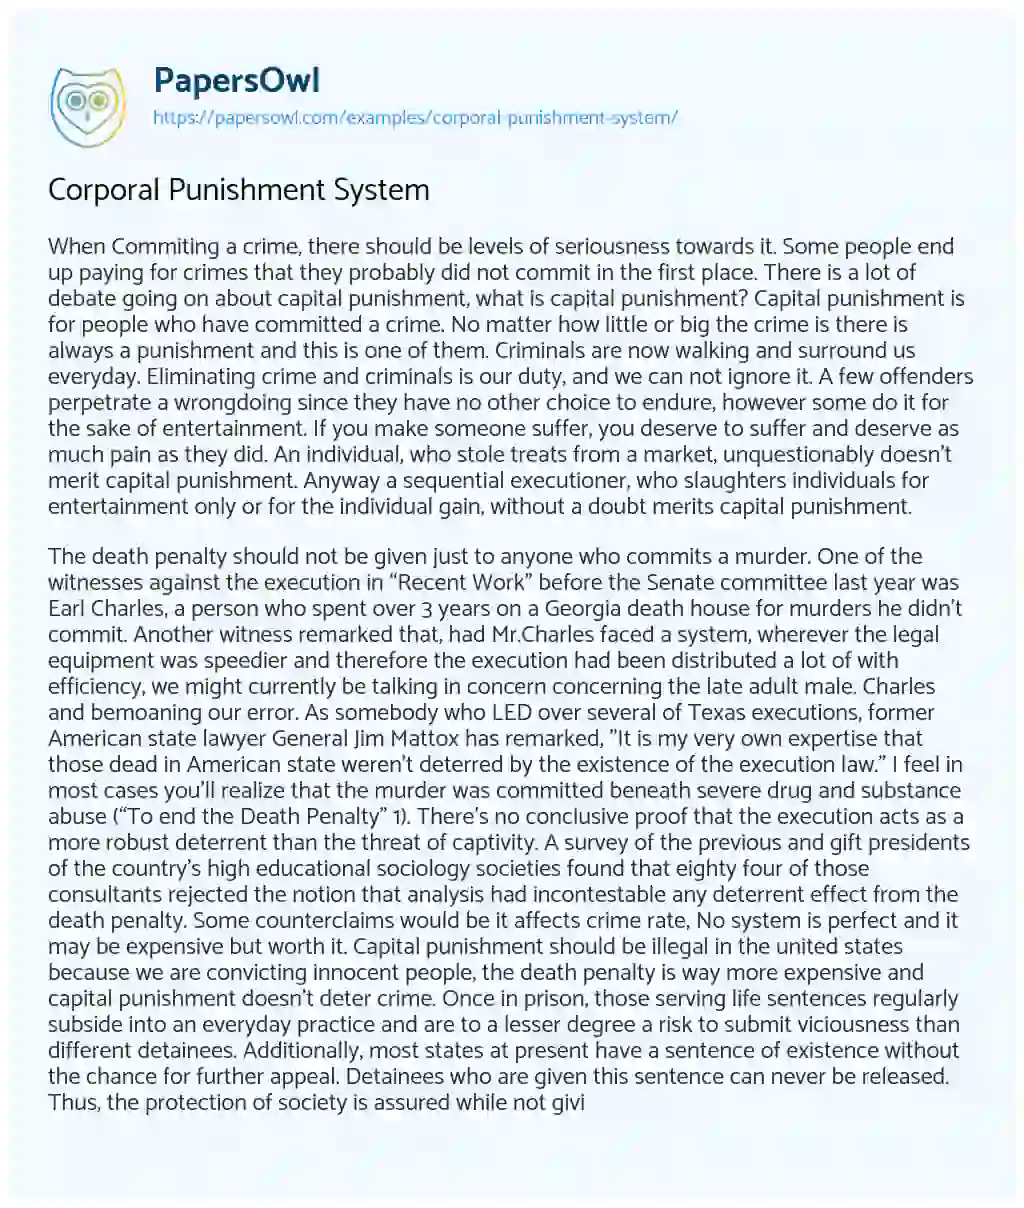 Essay on Corporal Punishment System